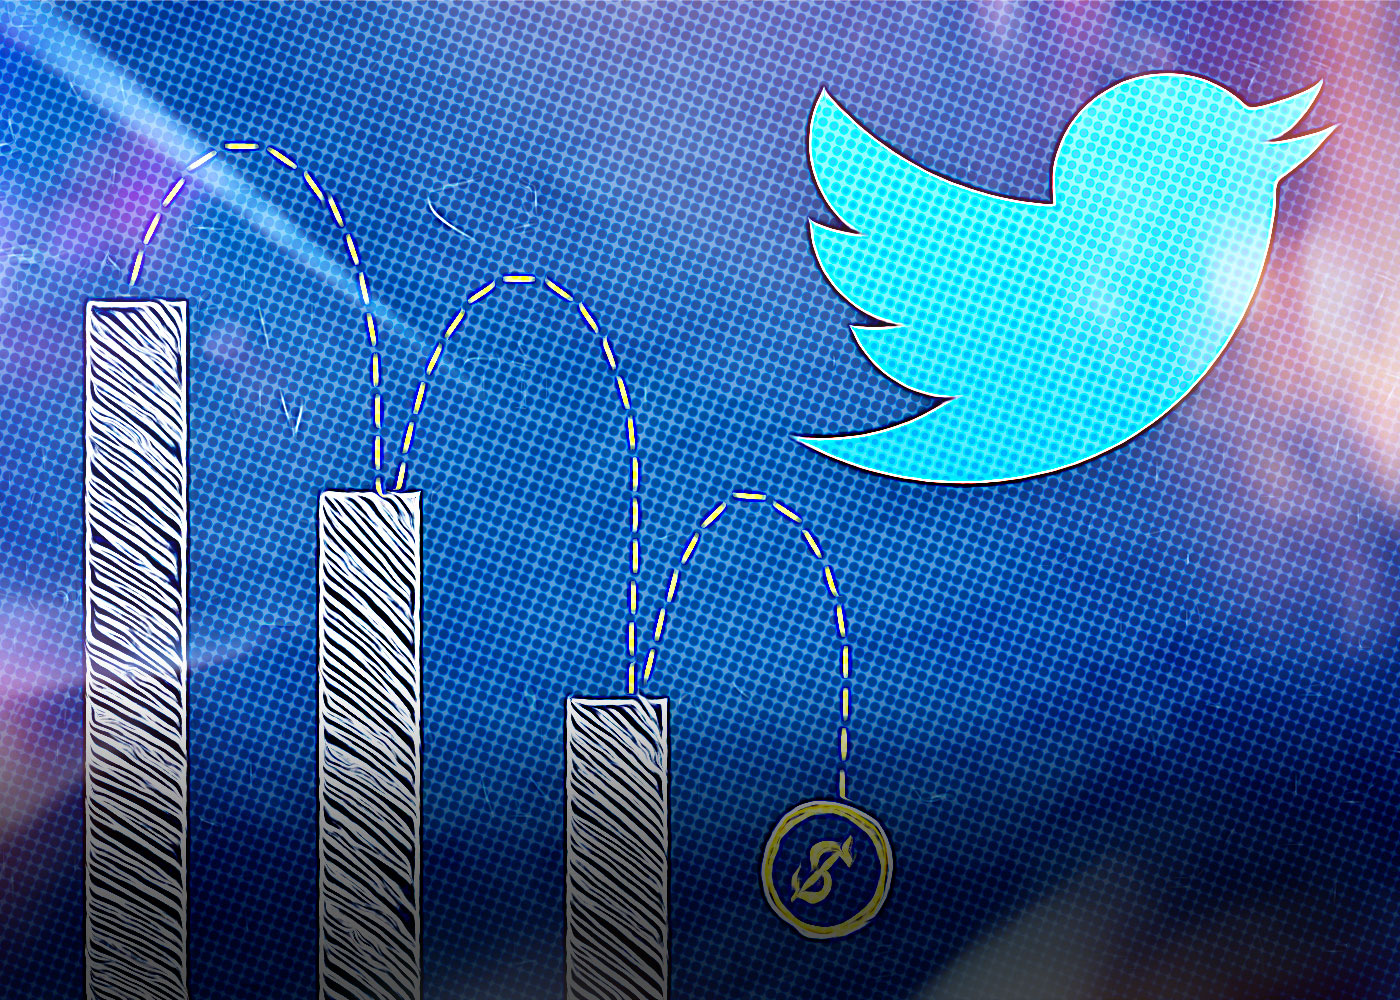 Twitter Revenues Collapse: Advertisers Are Abandoning the Platform